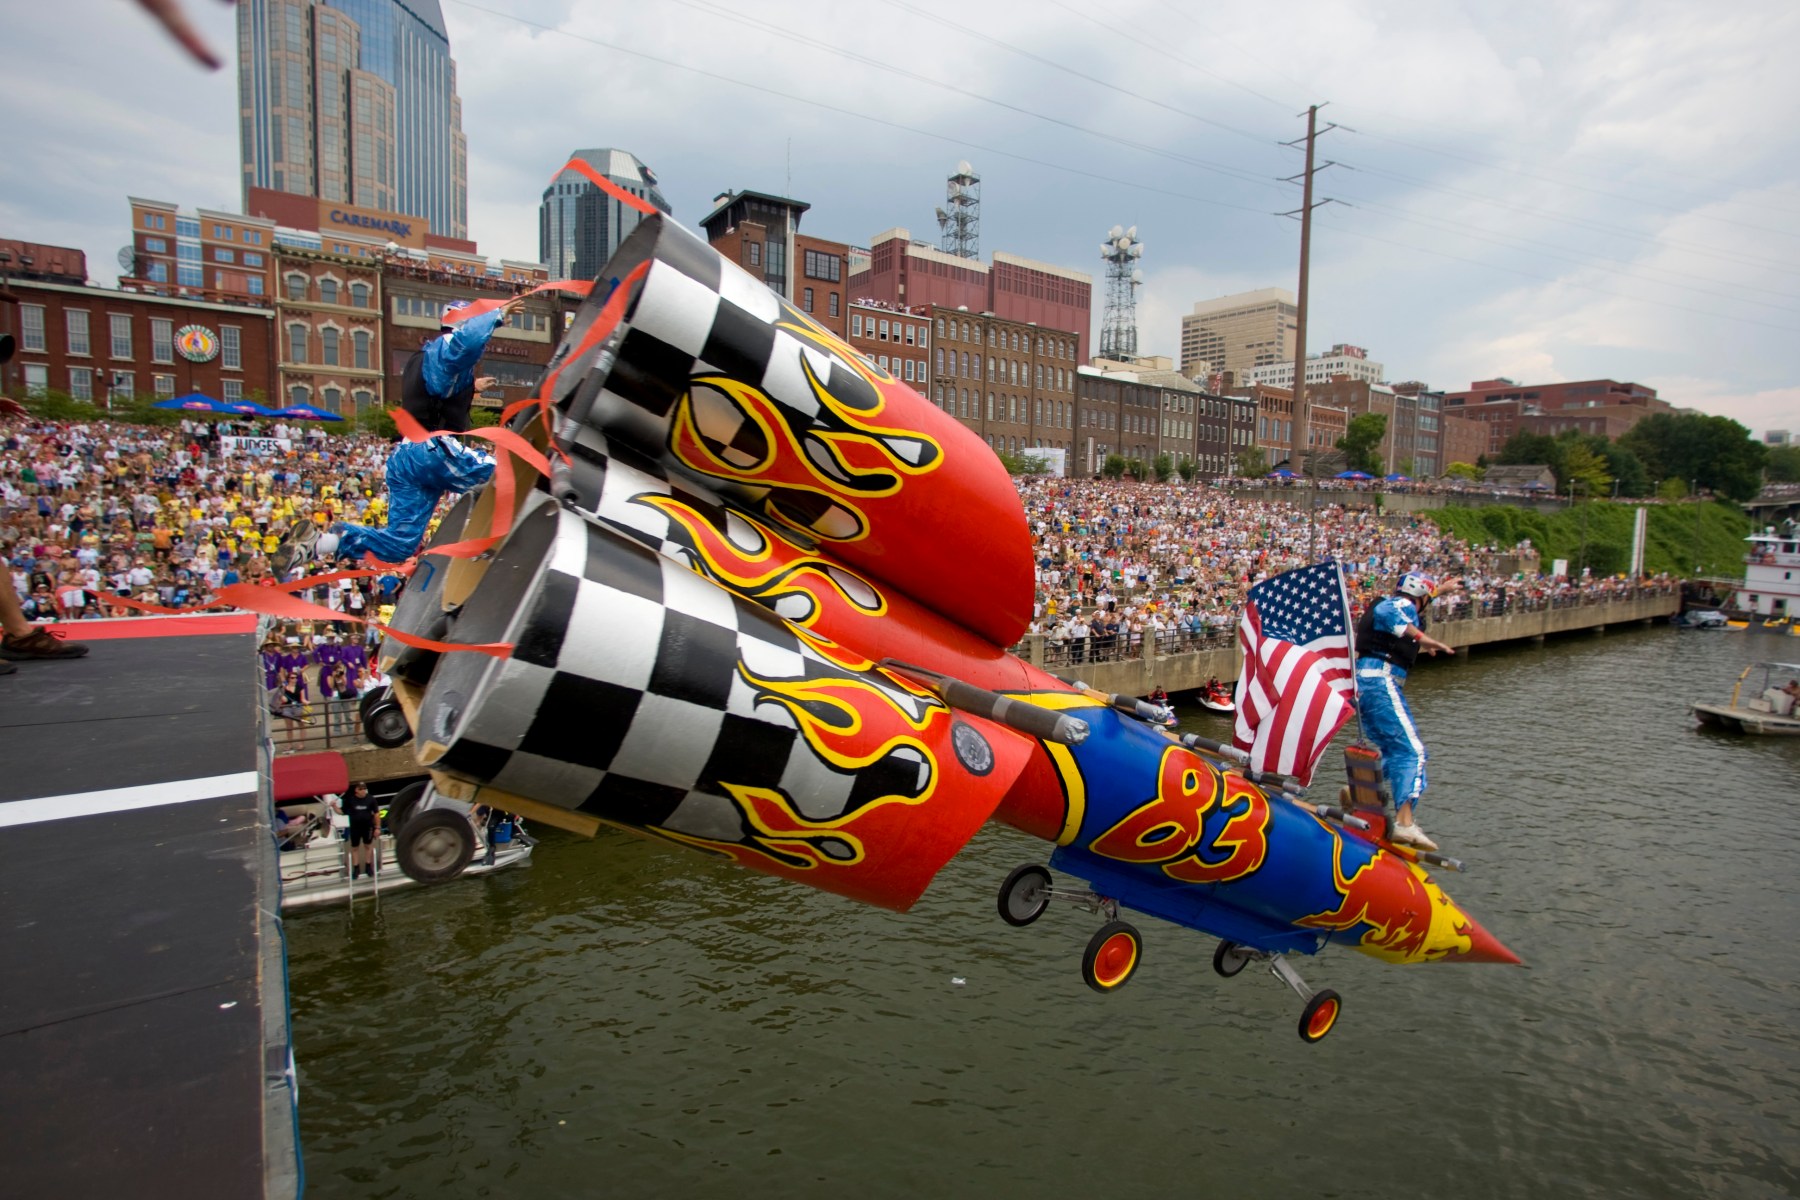 Team NASCAR from Atlanta launched off the platform with thousands of spectators cheering at the 2017 Flugtag Race in Nashville.